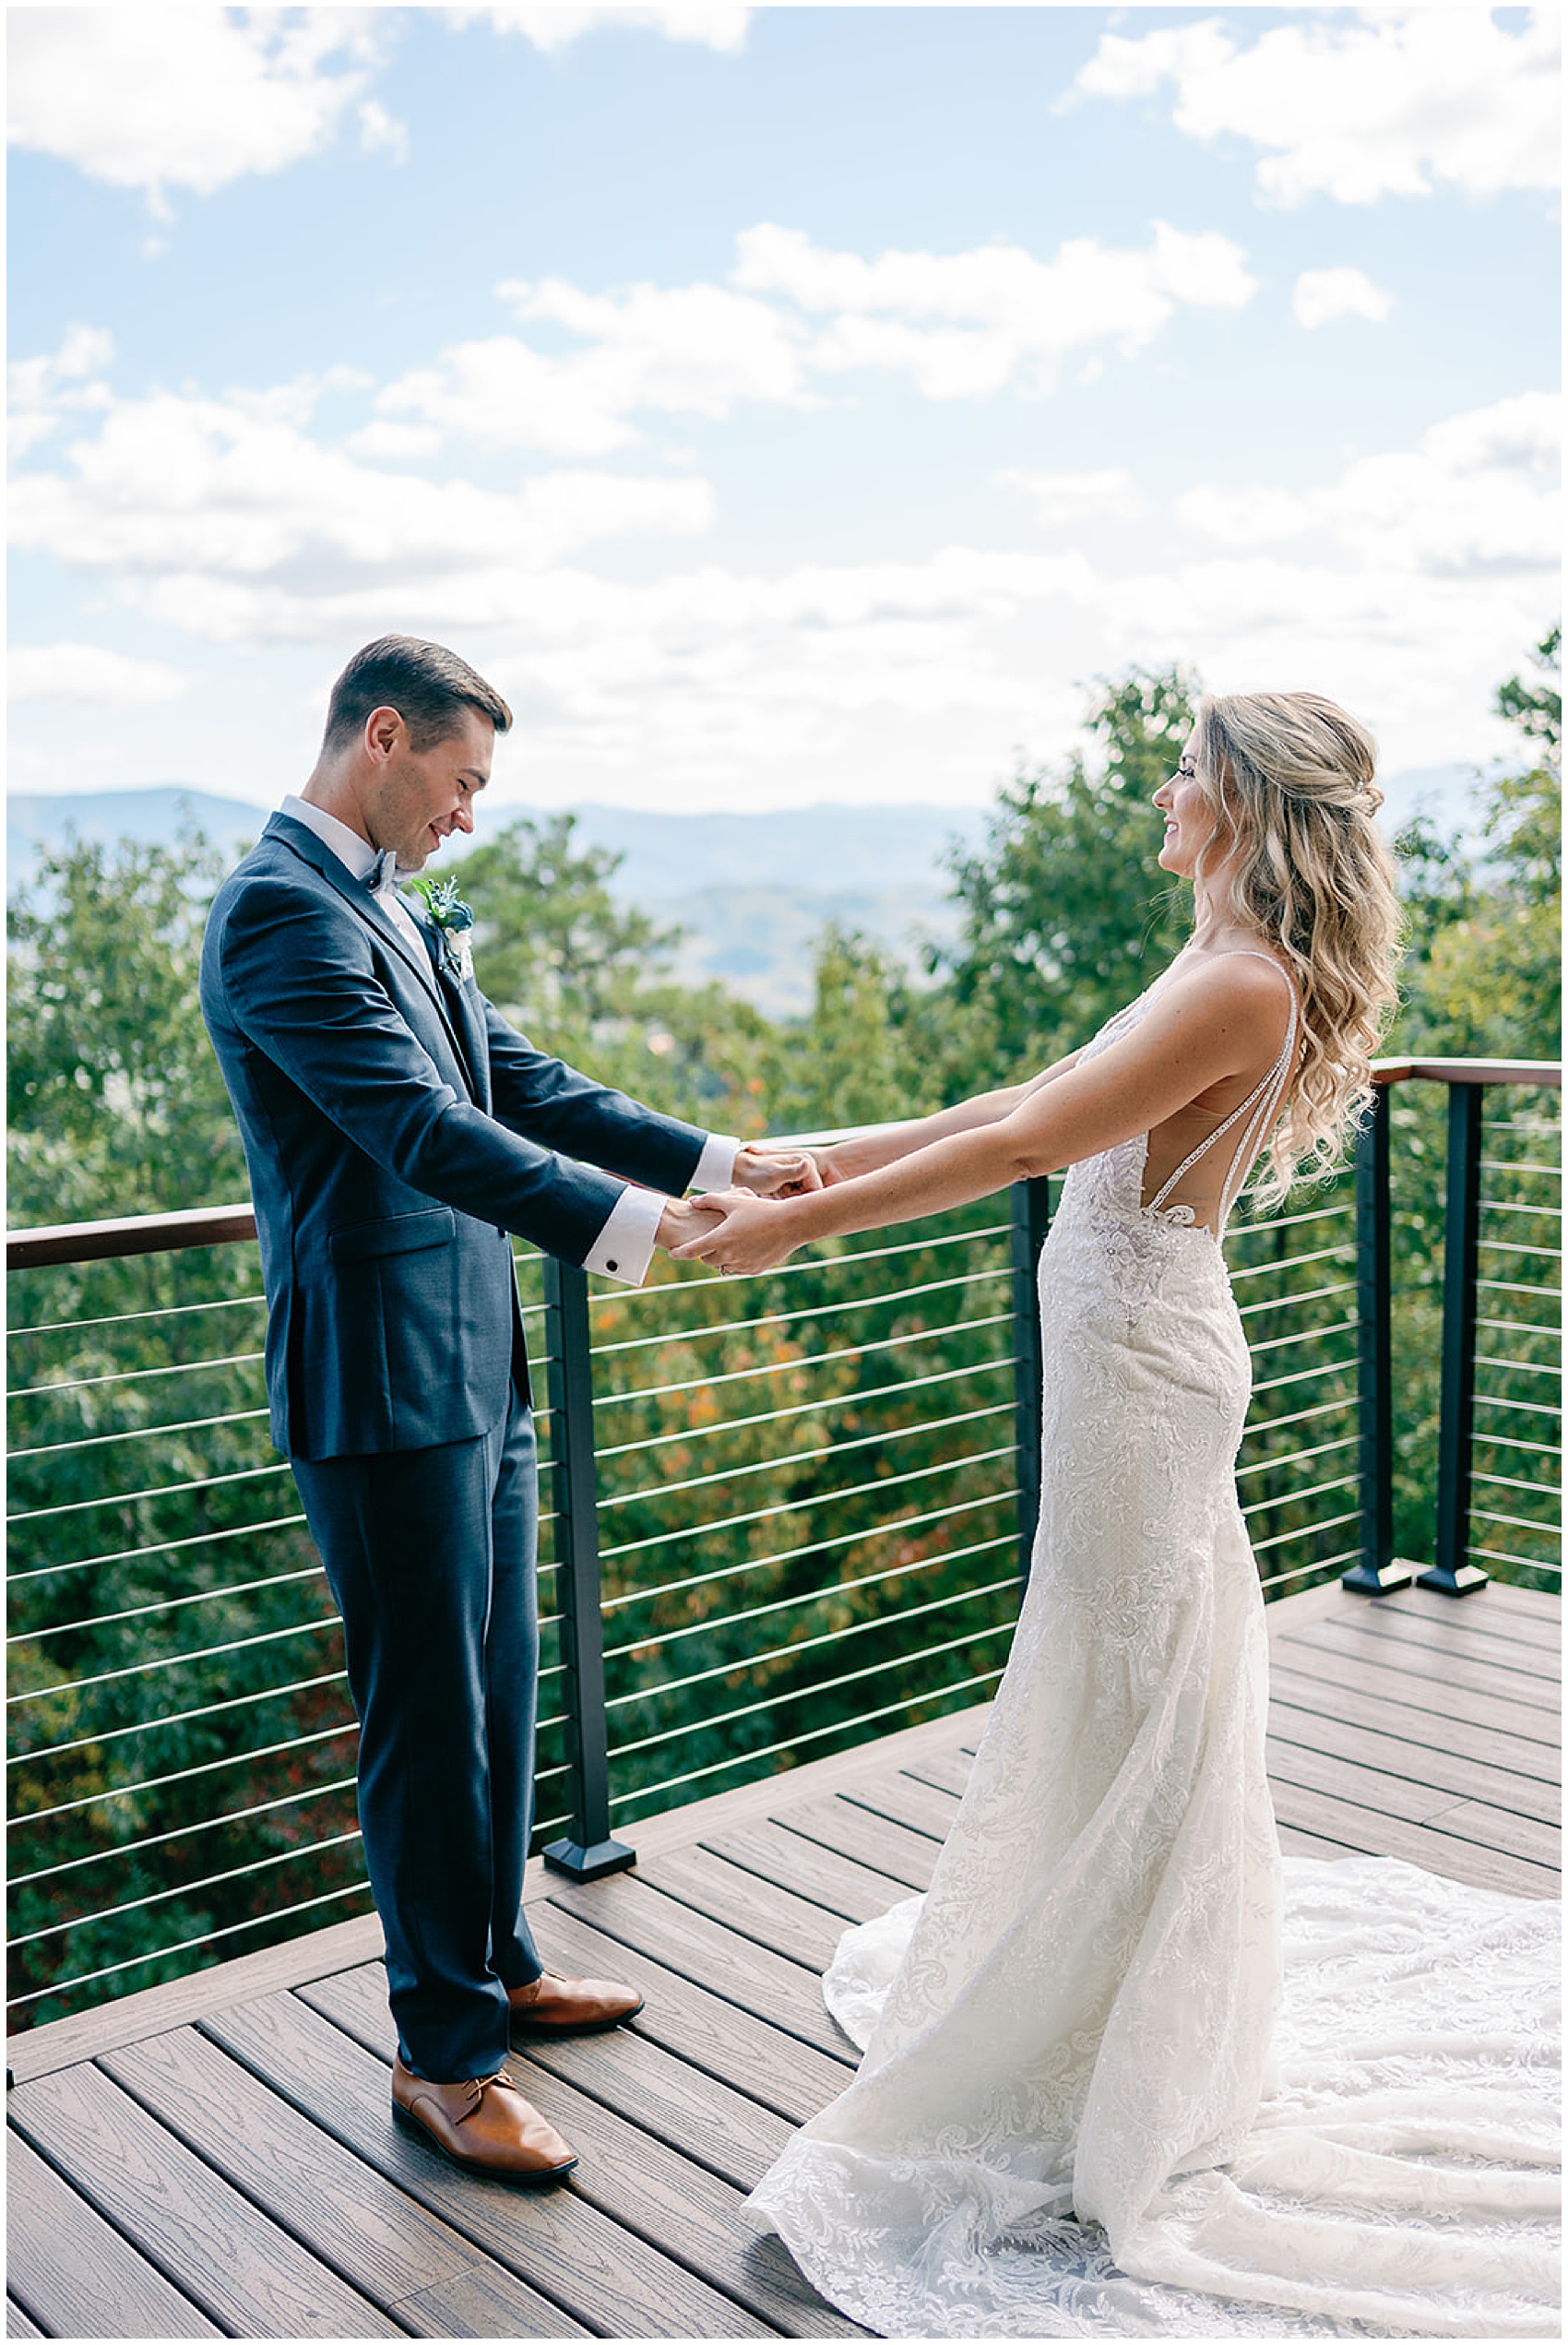 A groom holds hands and smiles while seeing his bride for the first time during their first look on an large mountain deck